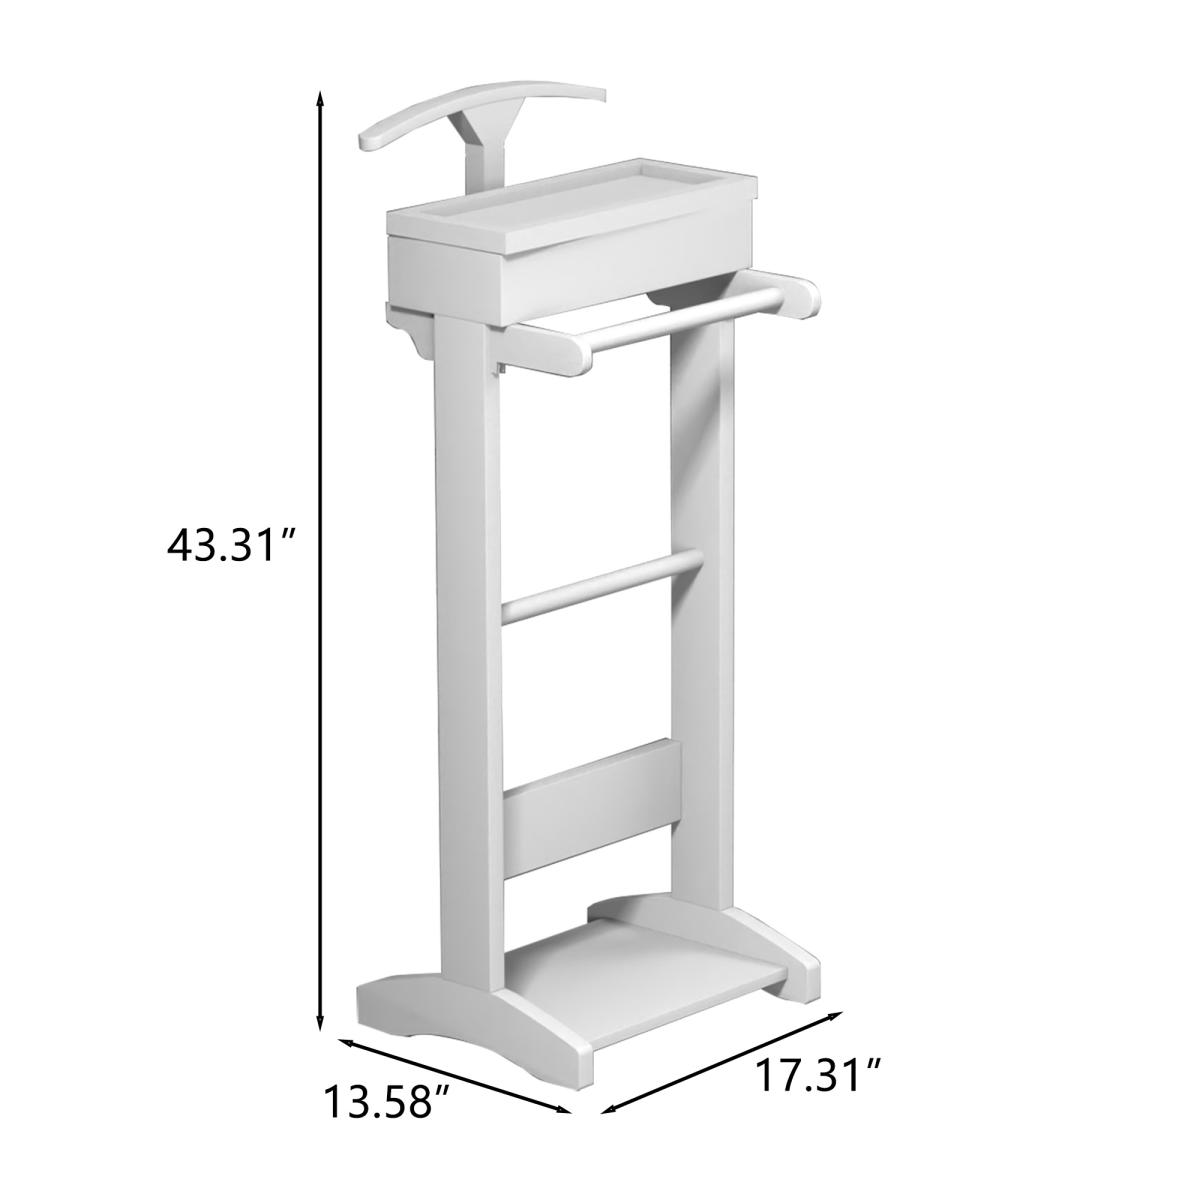 White Portable Garment Rack,Clothes Valet Stand with Storage Organizer